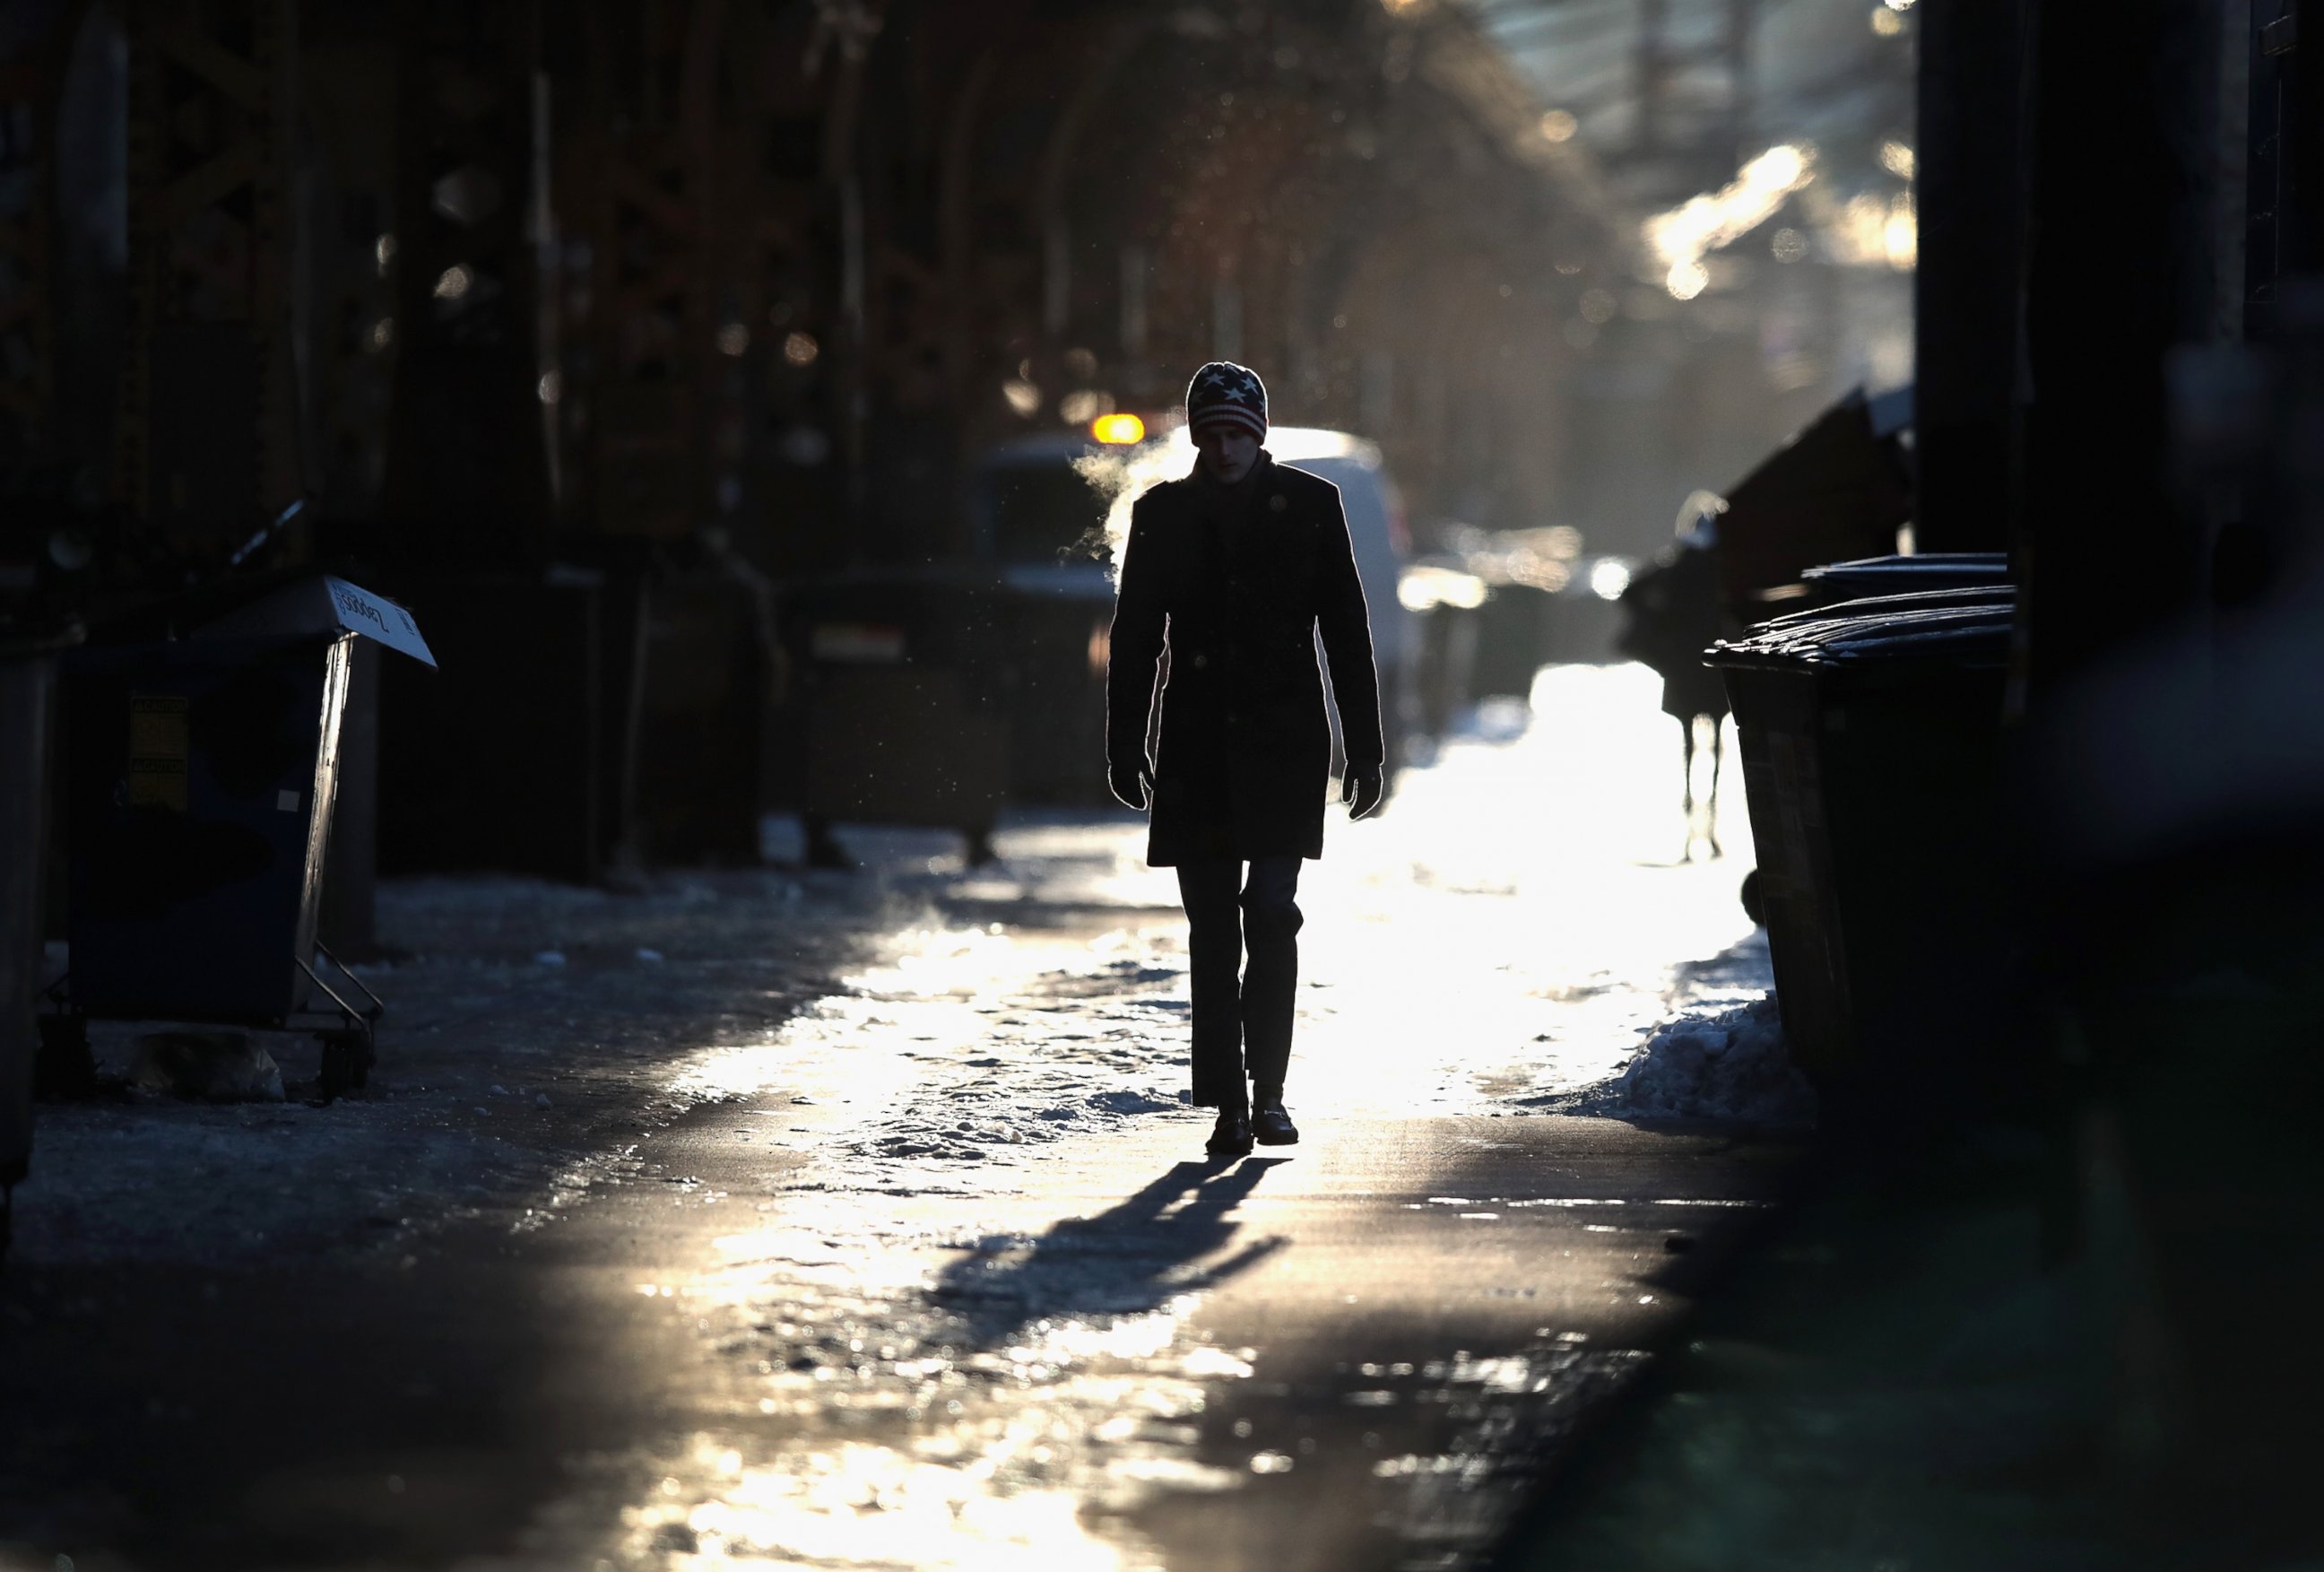 PHOTO: A man walks down an ice and snow covered alley toward an L station, Dec. 15, 2016, in Chicago, Illinois.